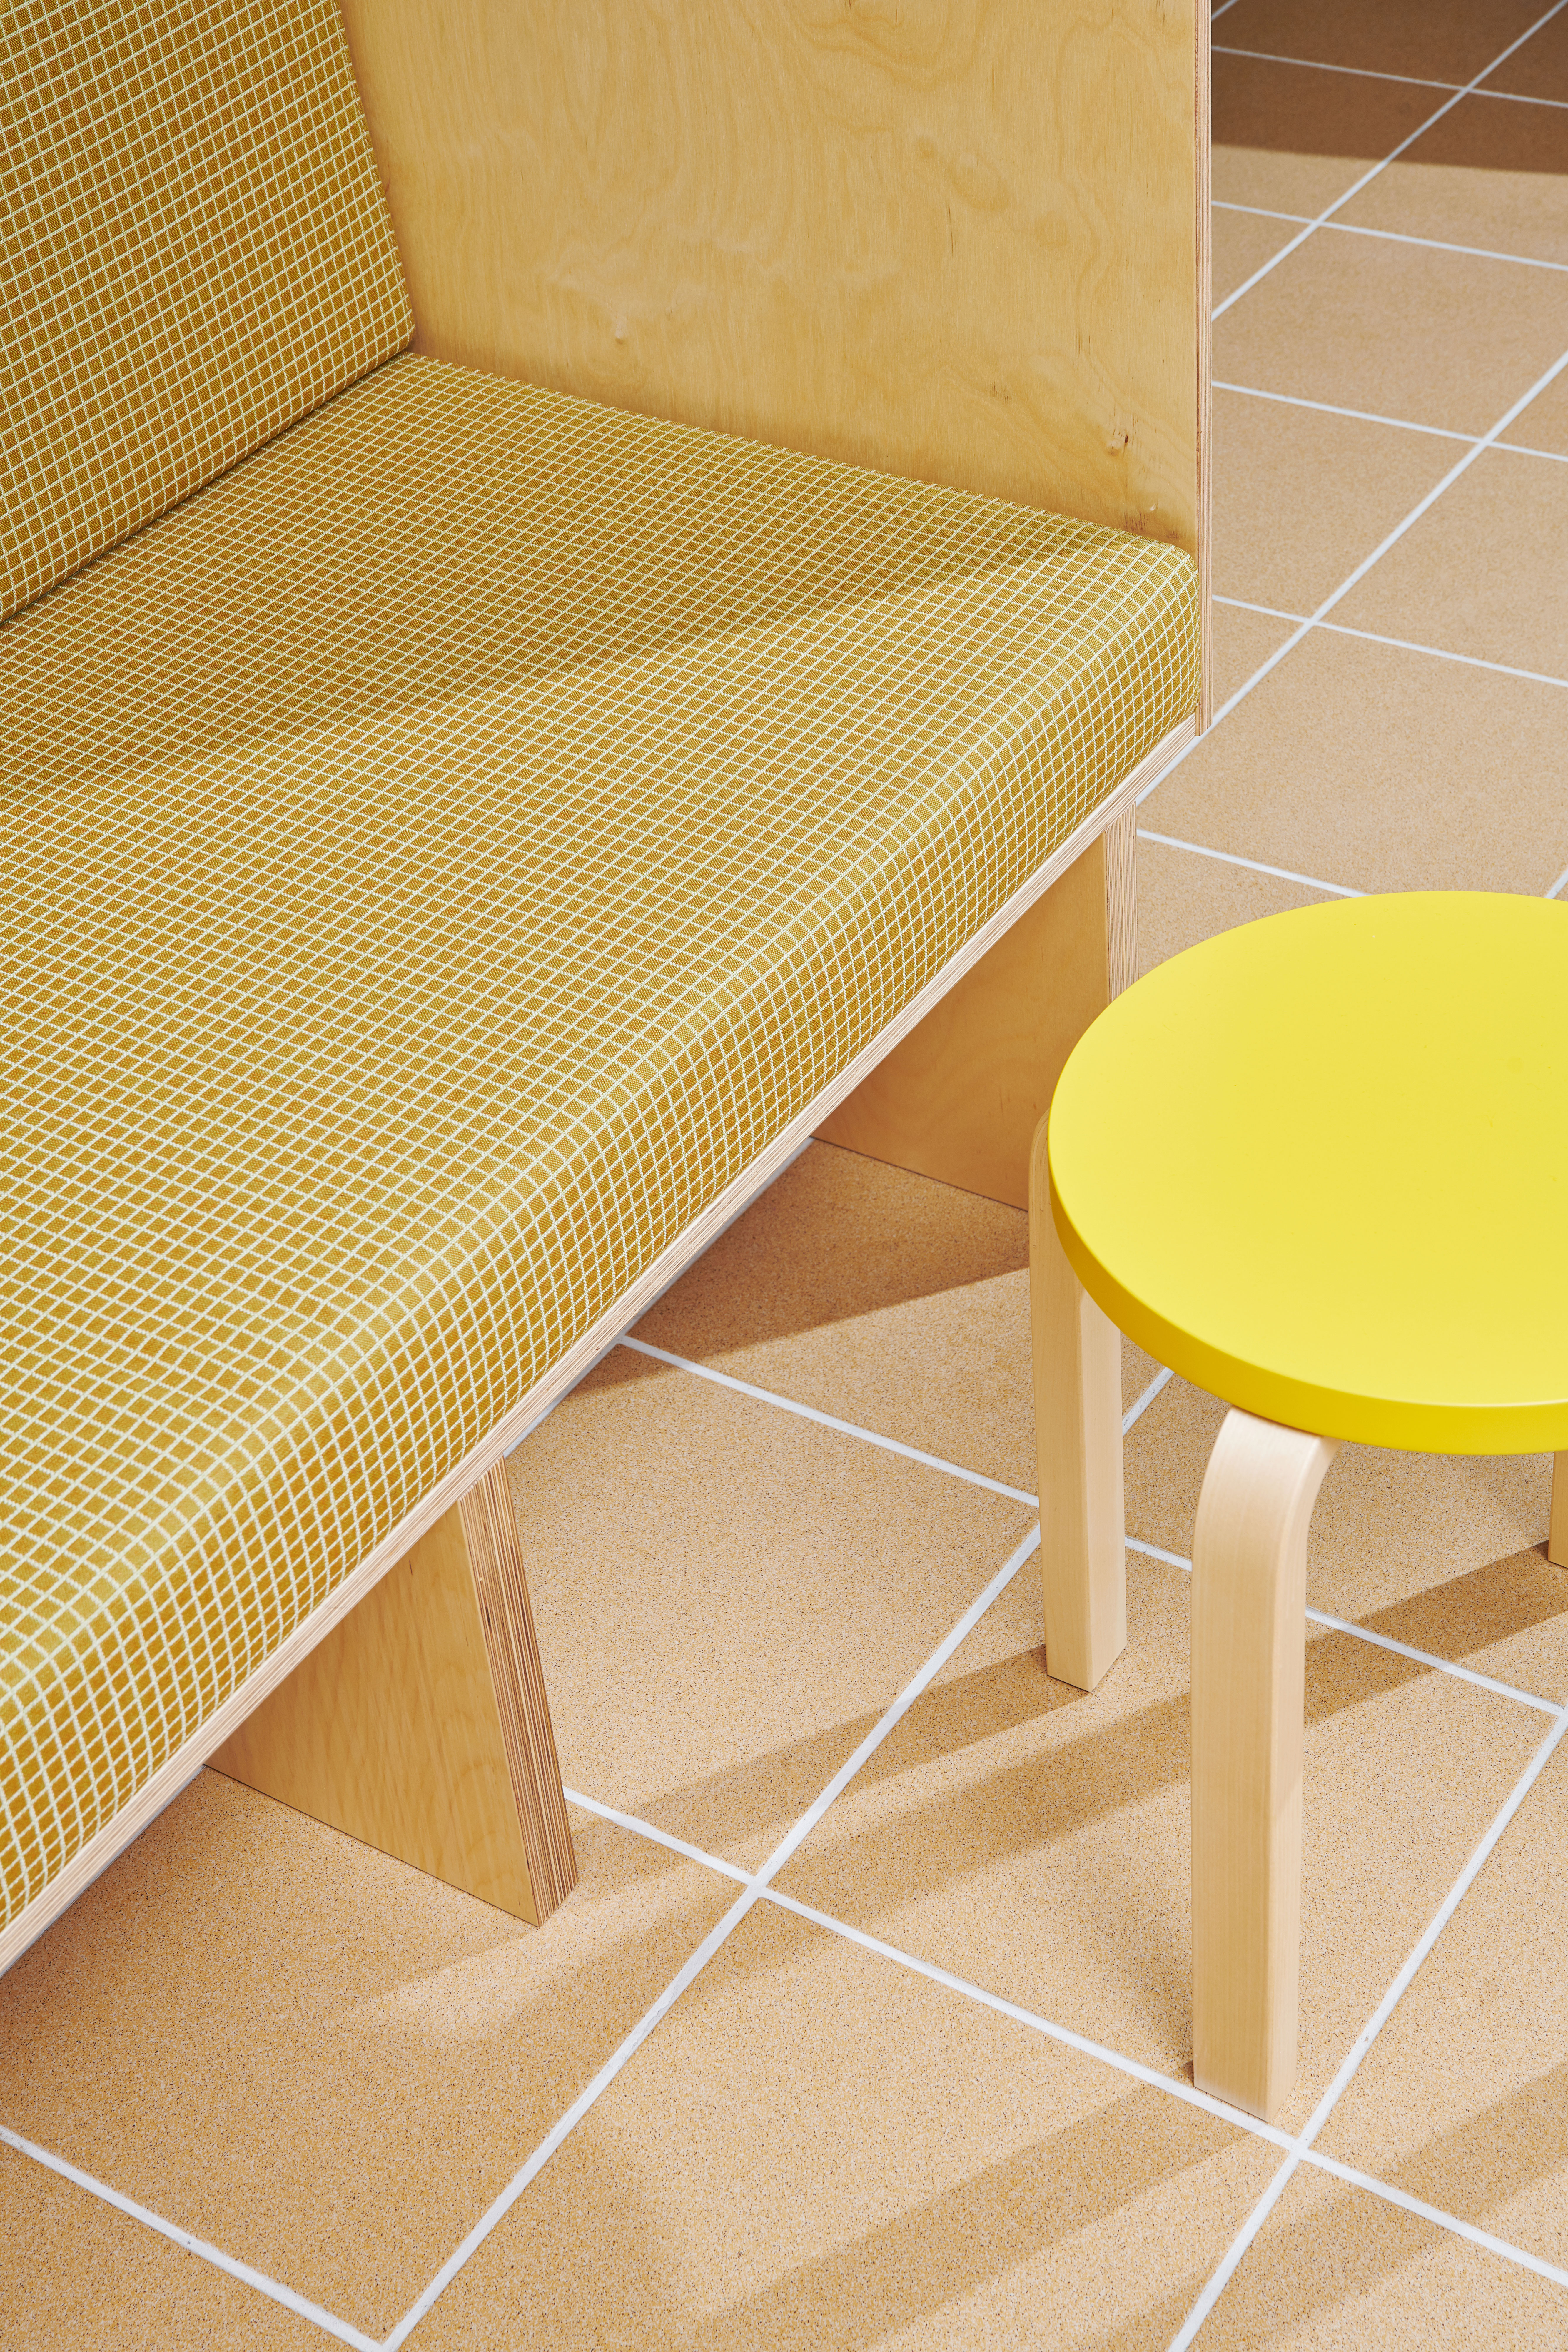 close-up of a yellow bench, pale yellow tiles and yellow artek stool with wooden legs